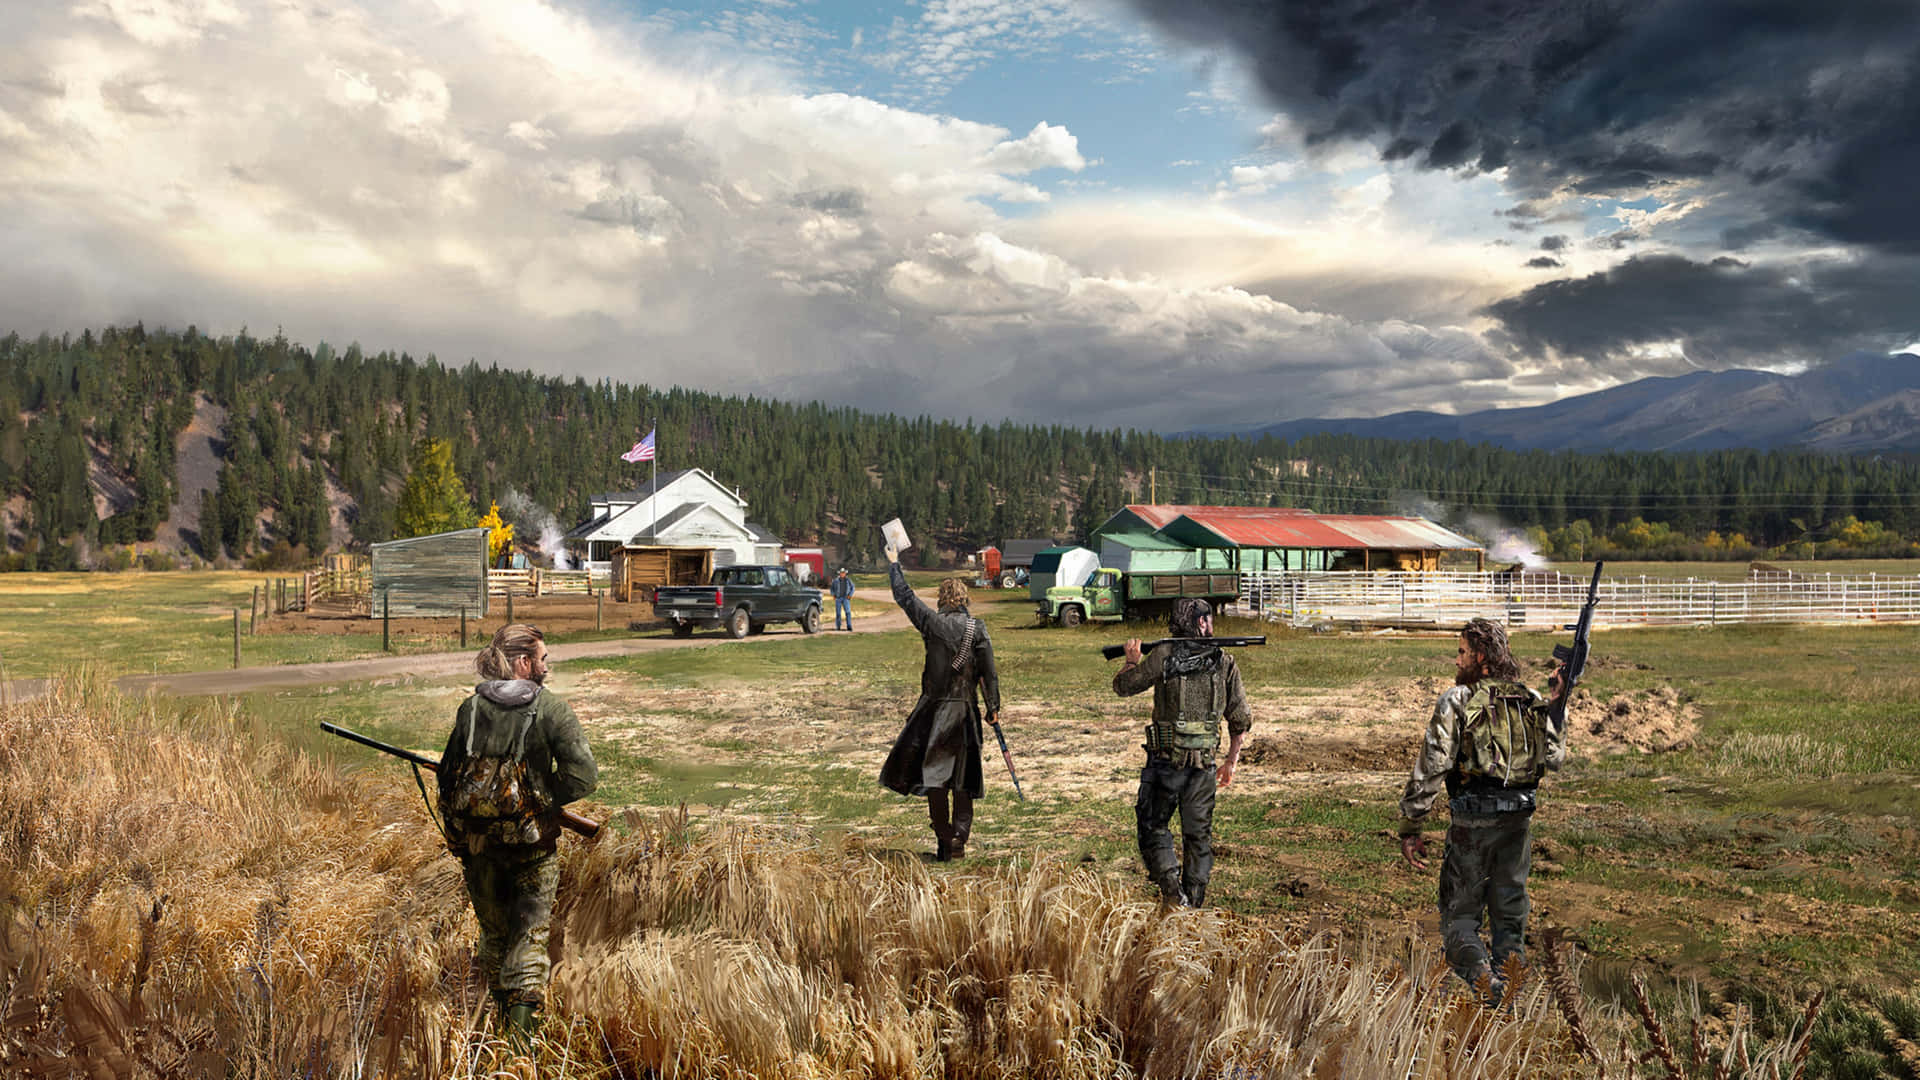 Experience the stunning visuals of Far Cry 5 in 4K Ultra HD. Wallpaper